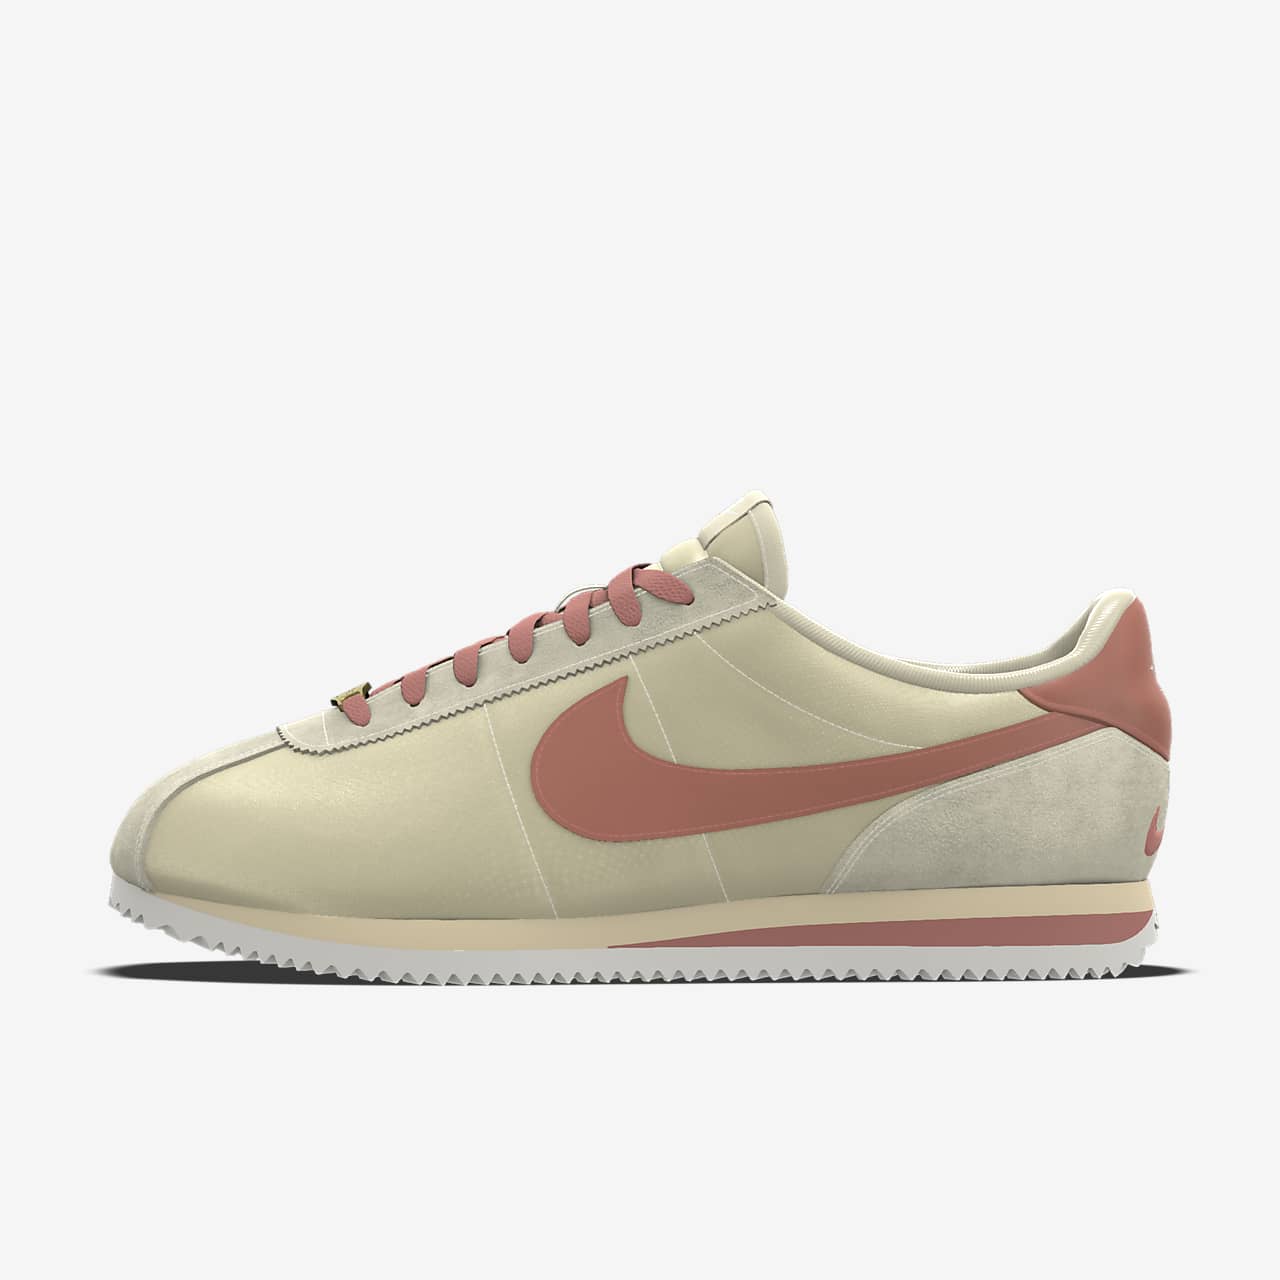 Nike Cortez By You personalisierbarer Schuh